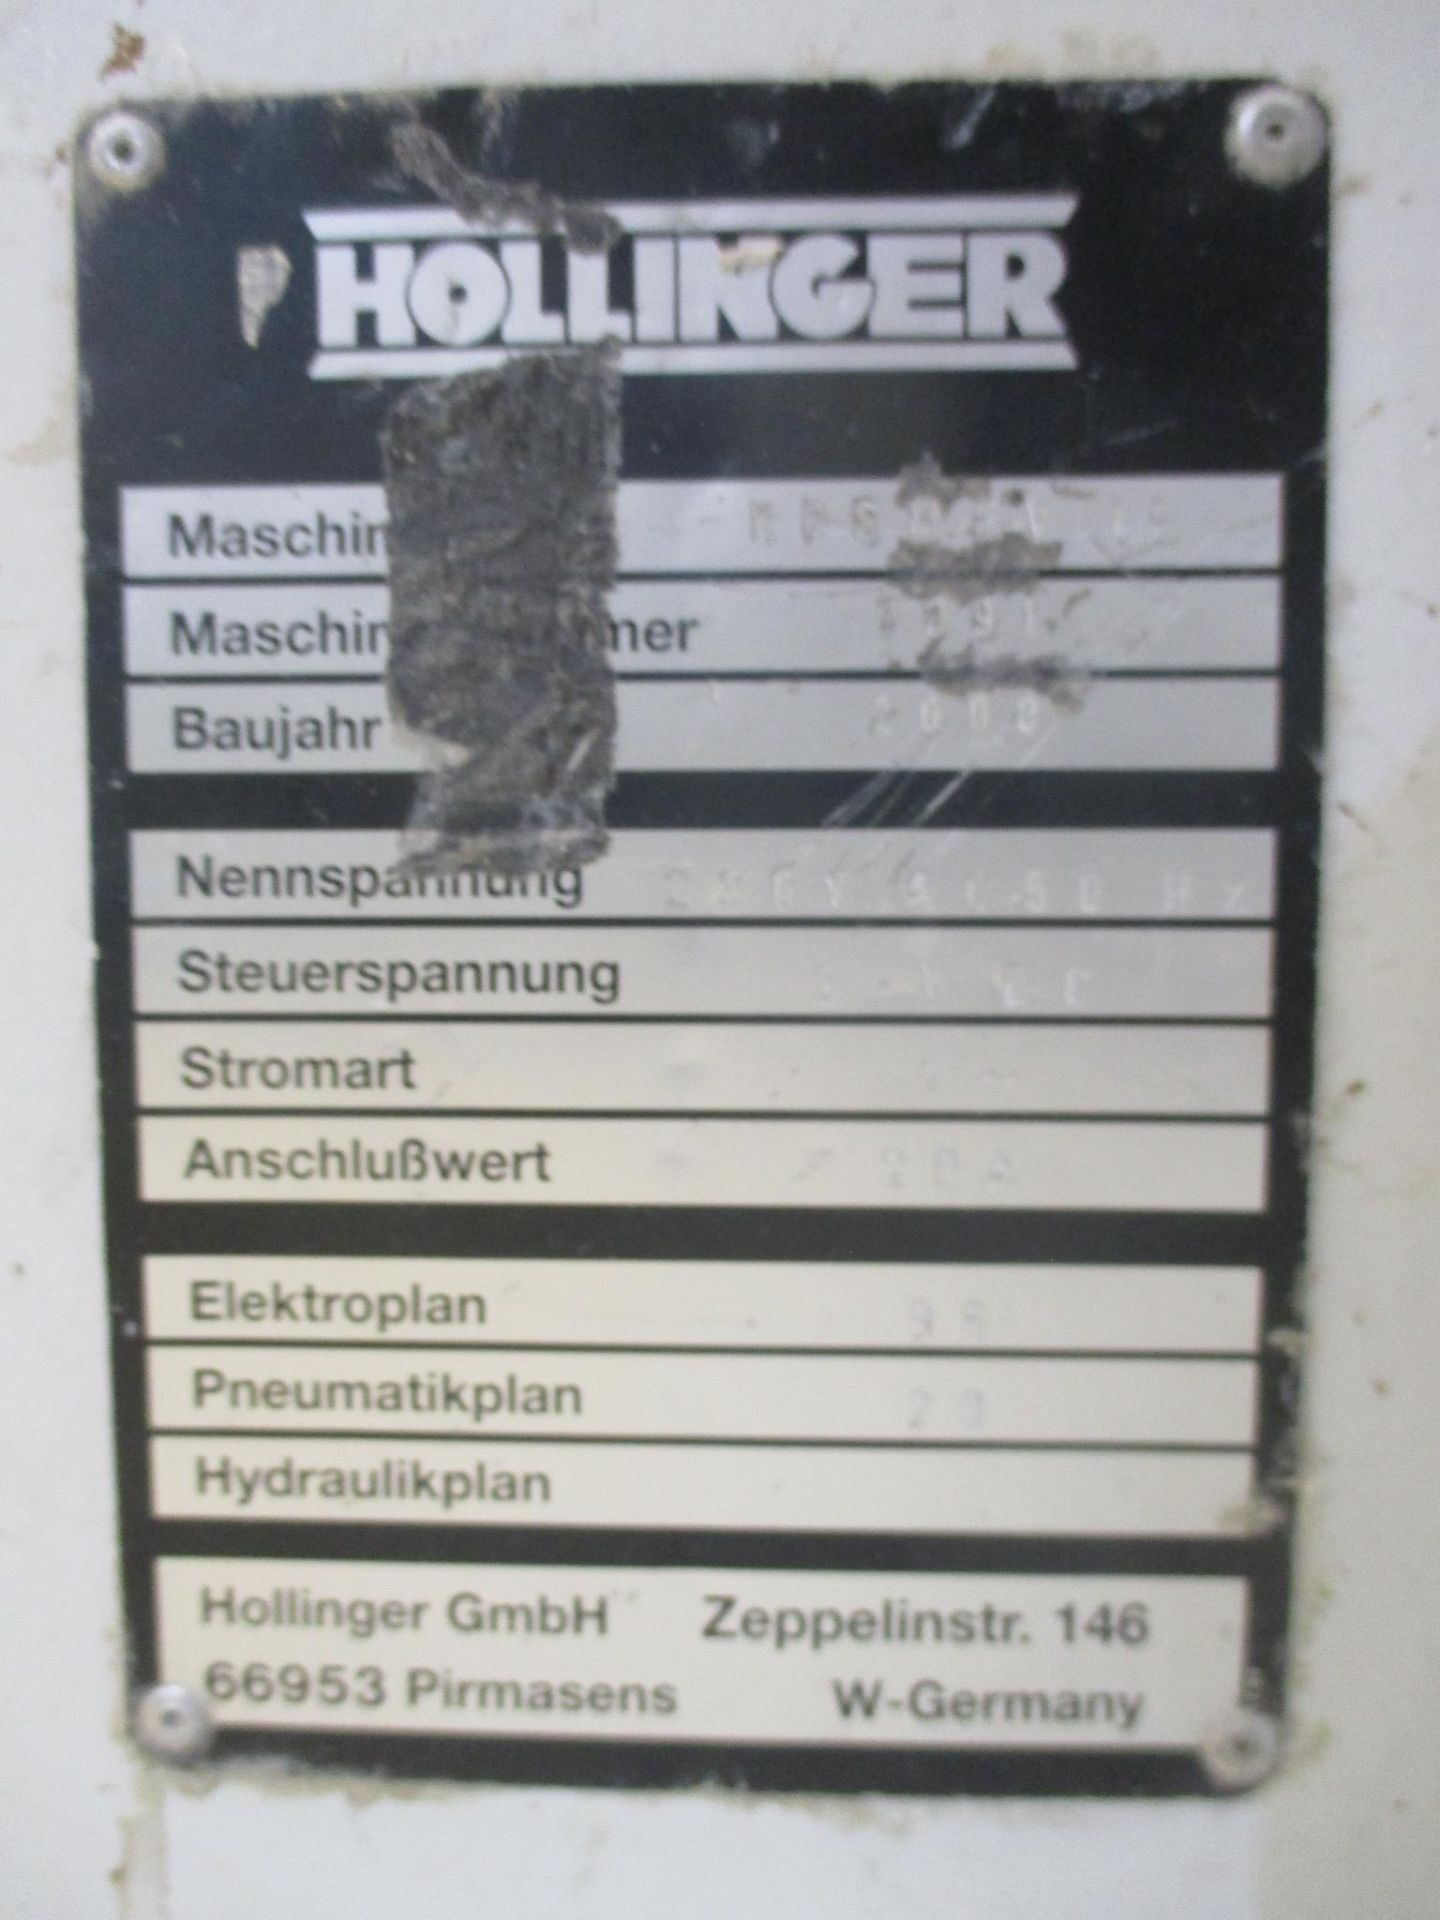 1: Hollinger RP3M- VH3 Butt Welder Serial Number: 7991 Year of Manufacture: 2000 - Image 3 of 3